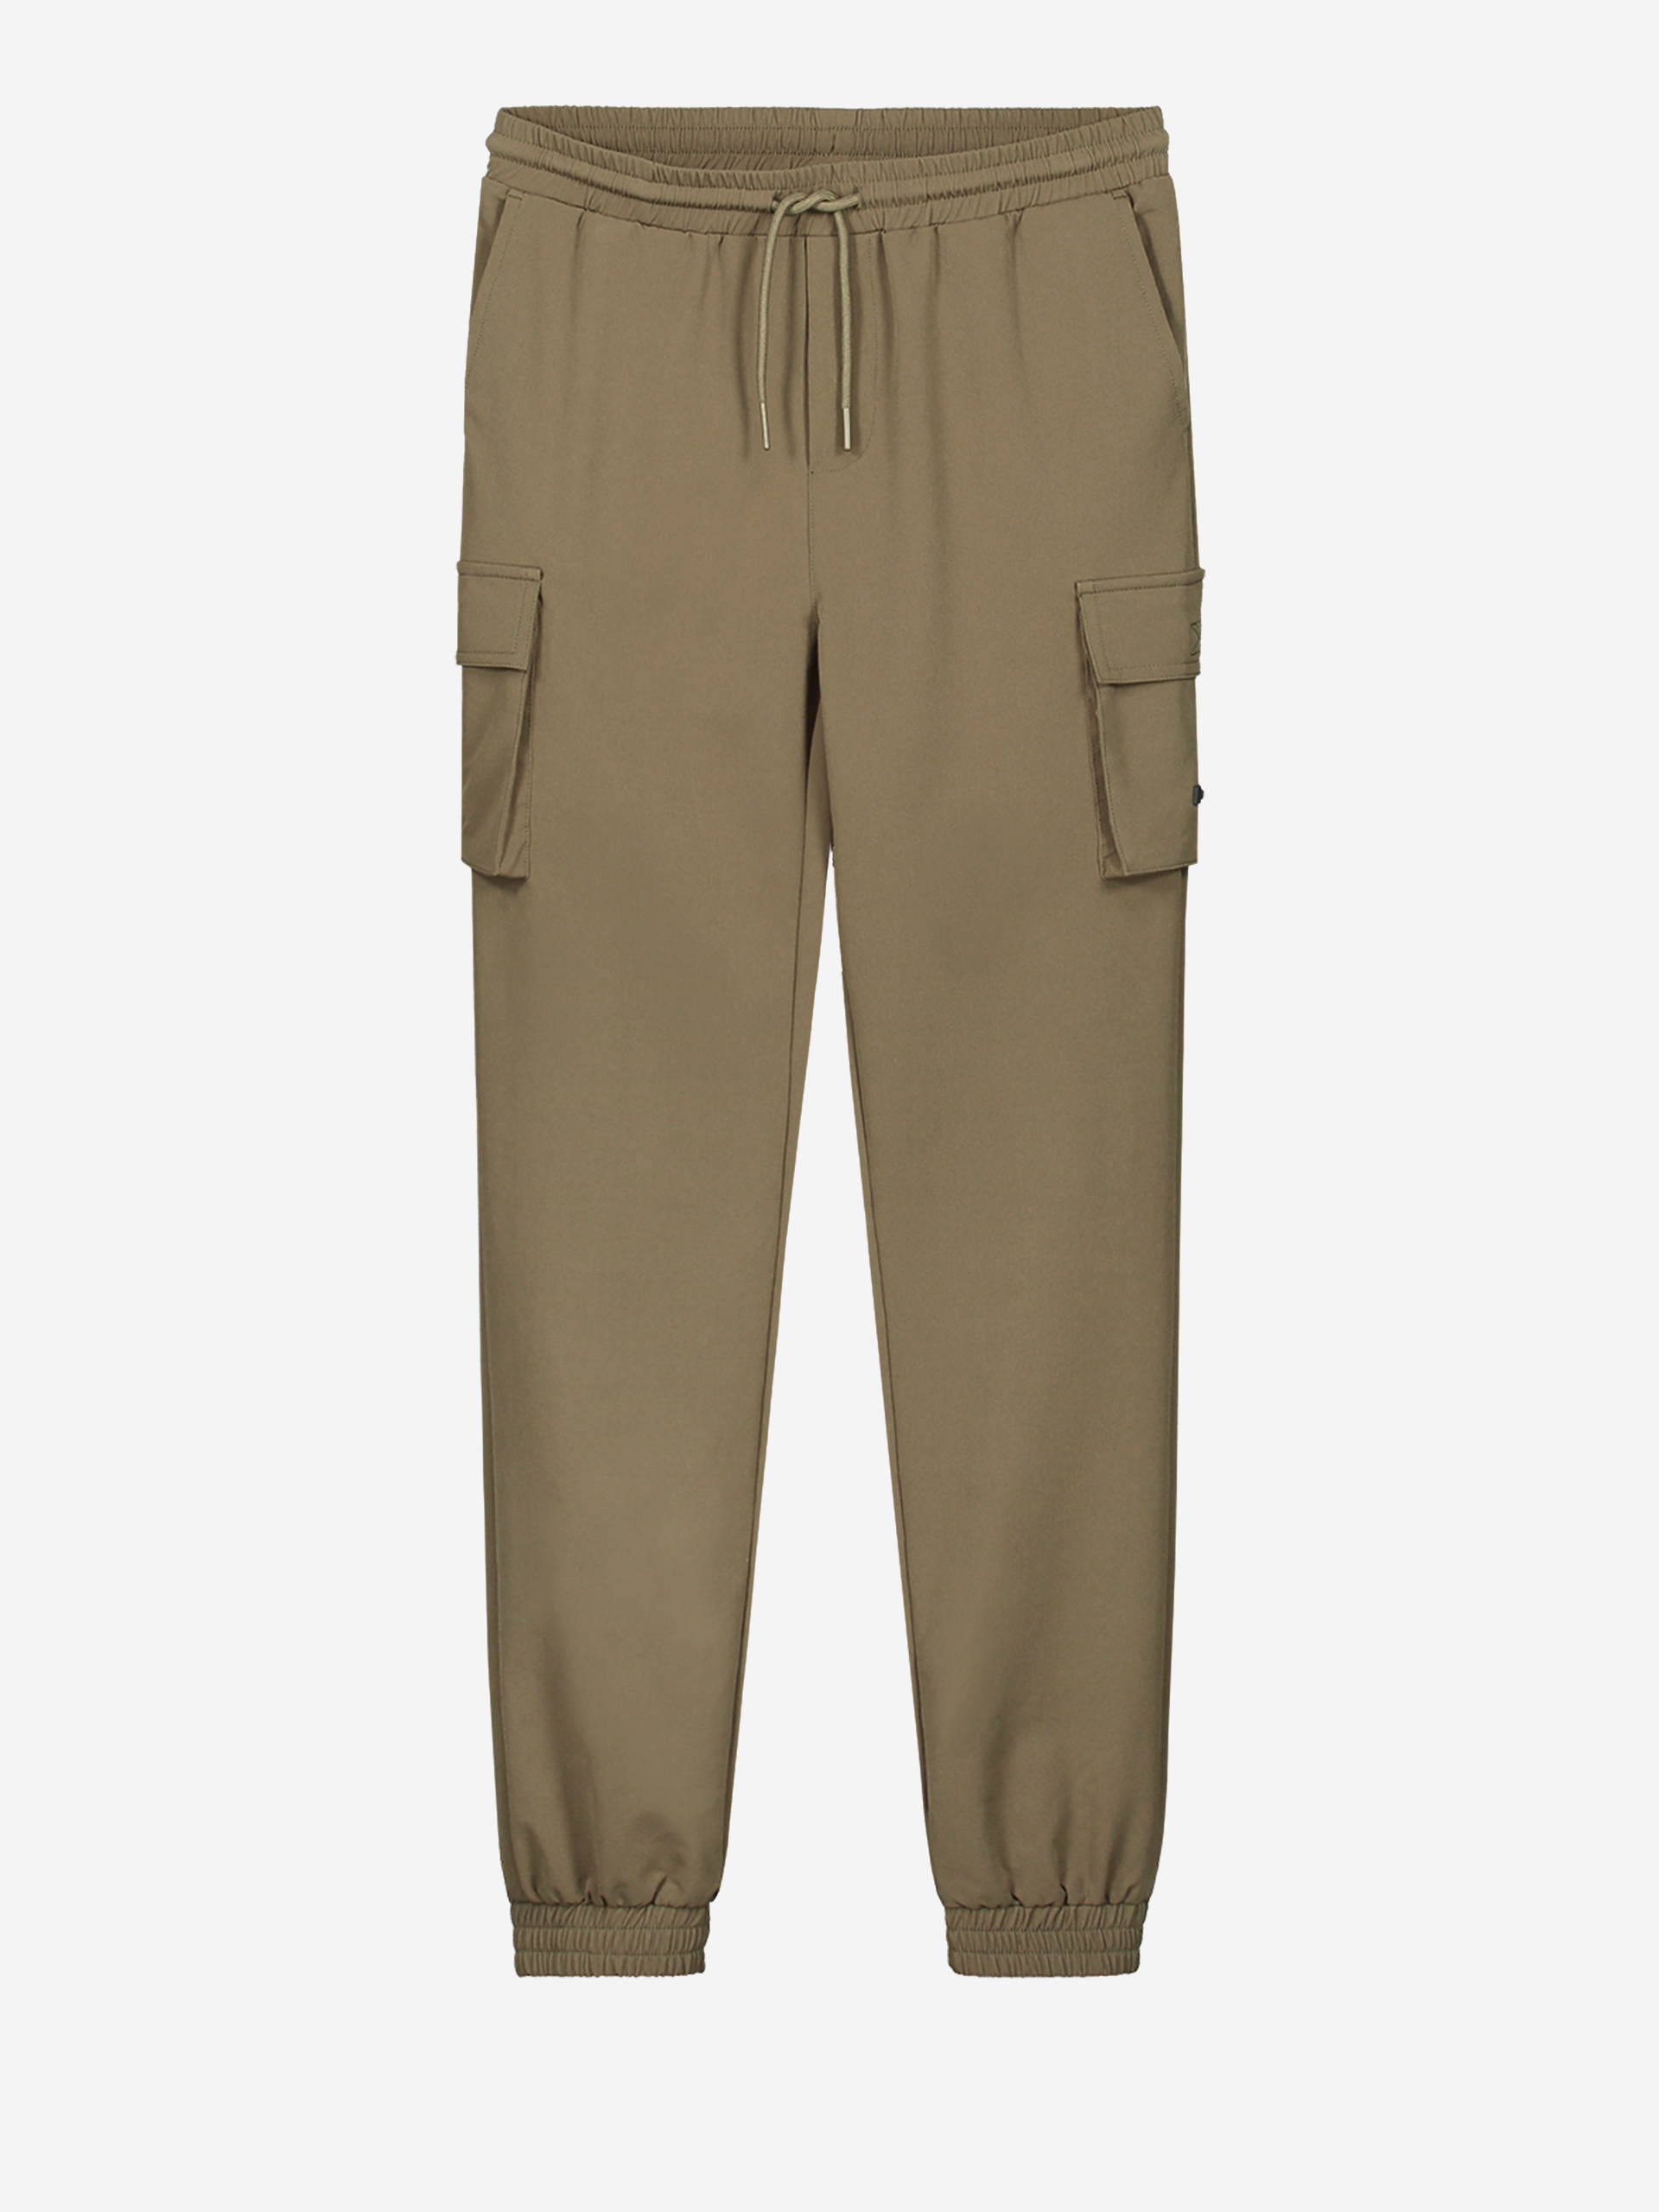 Utility pants with mid rise